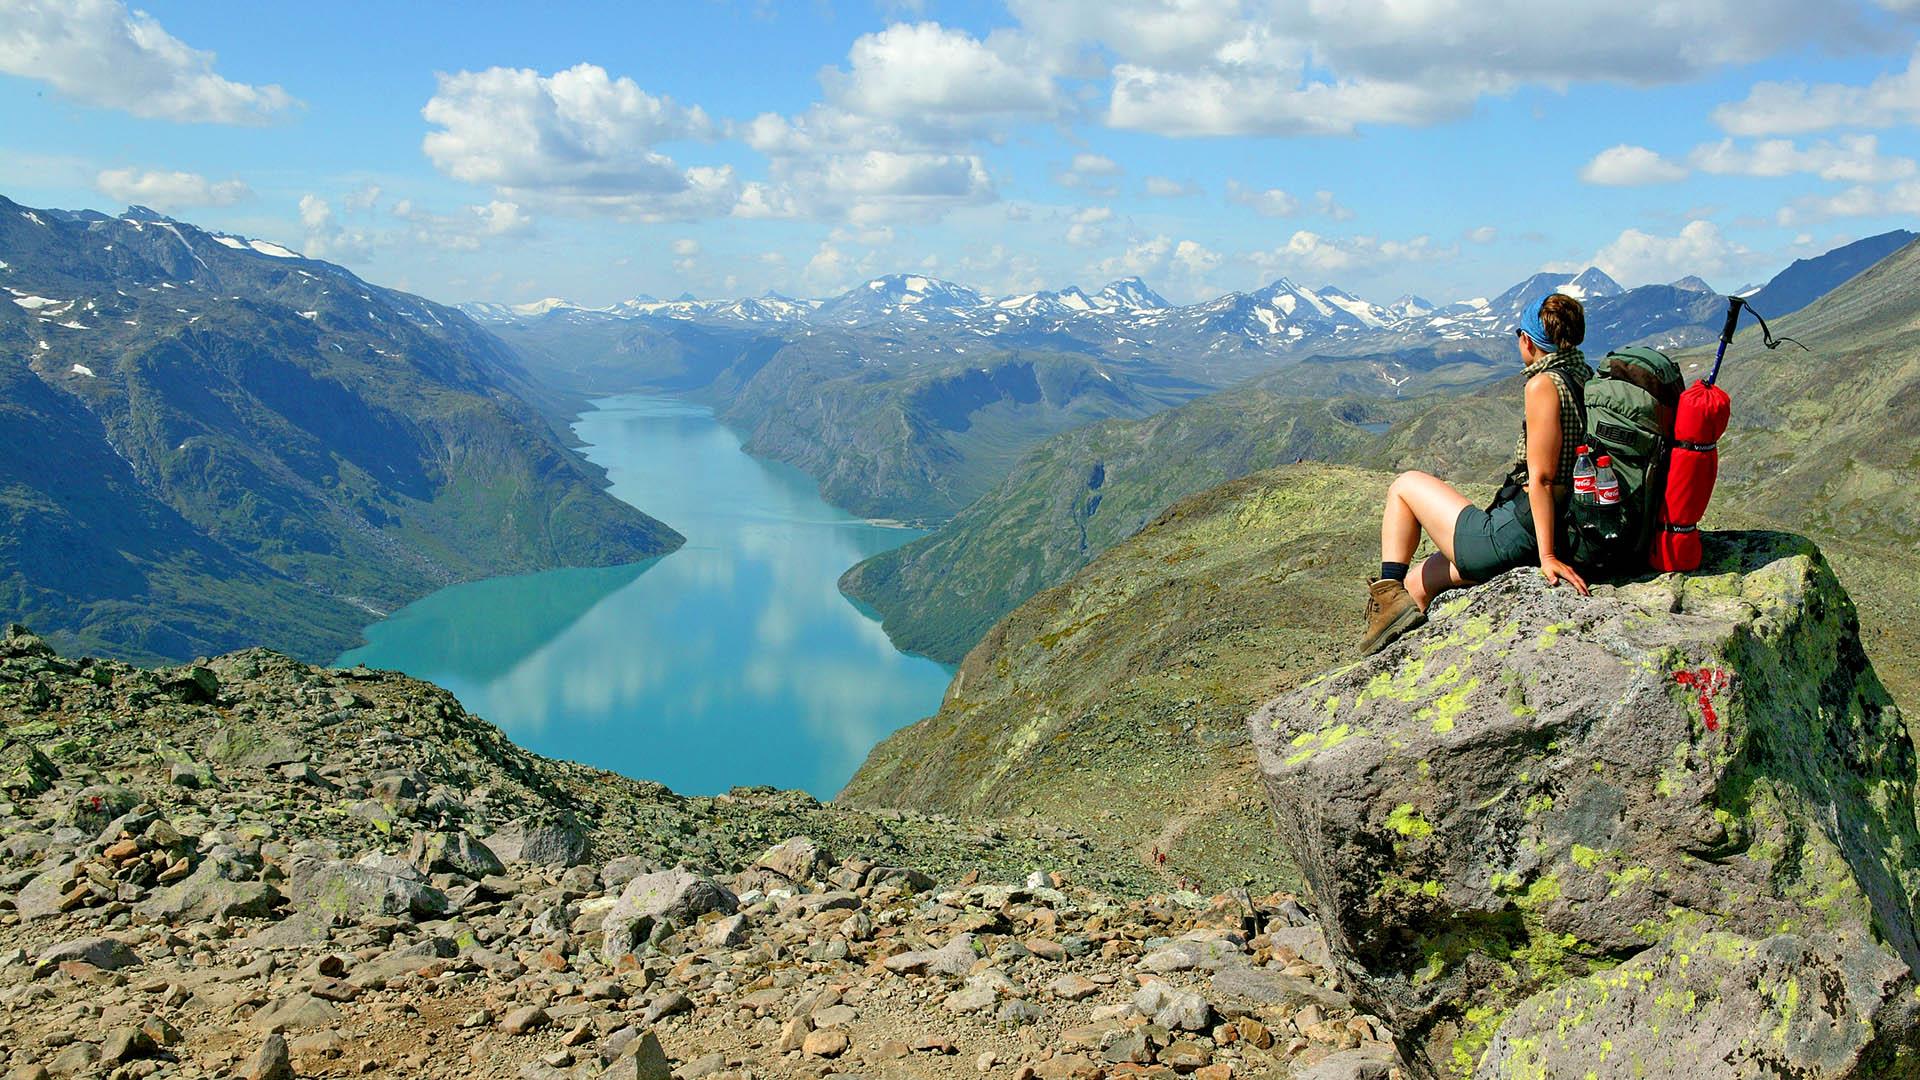 A woman sits on a boulder overlooking a large alpine lake surrounded by high mountains on a beautiful and warm summer day.